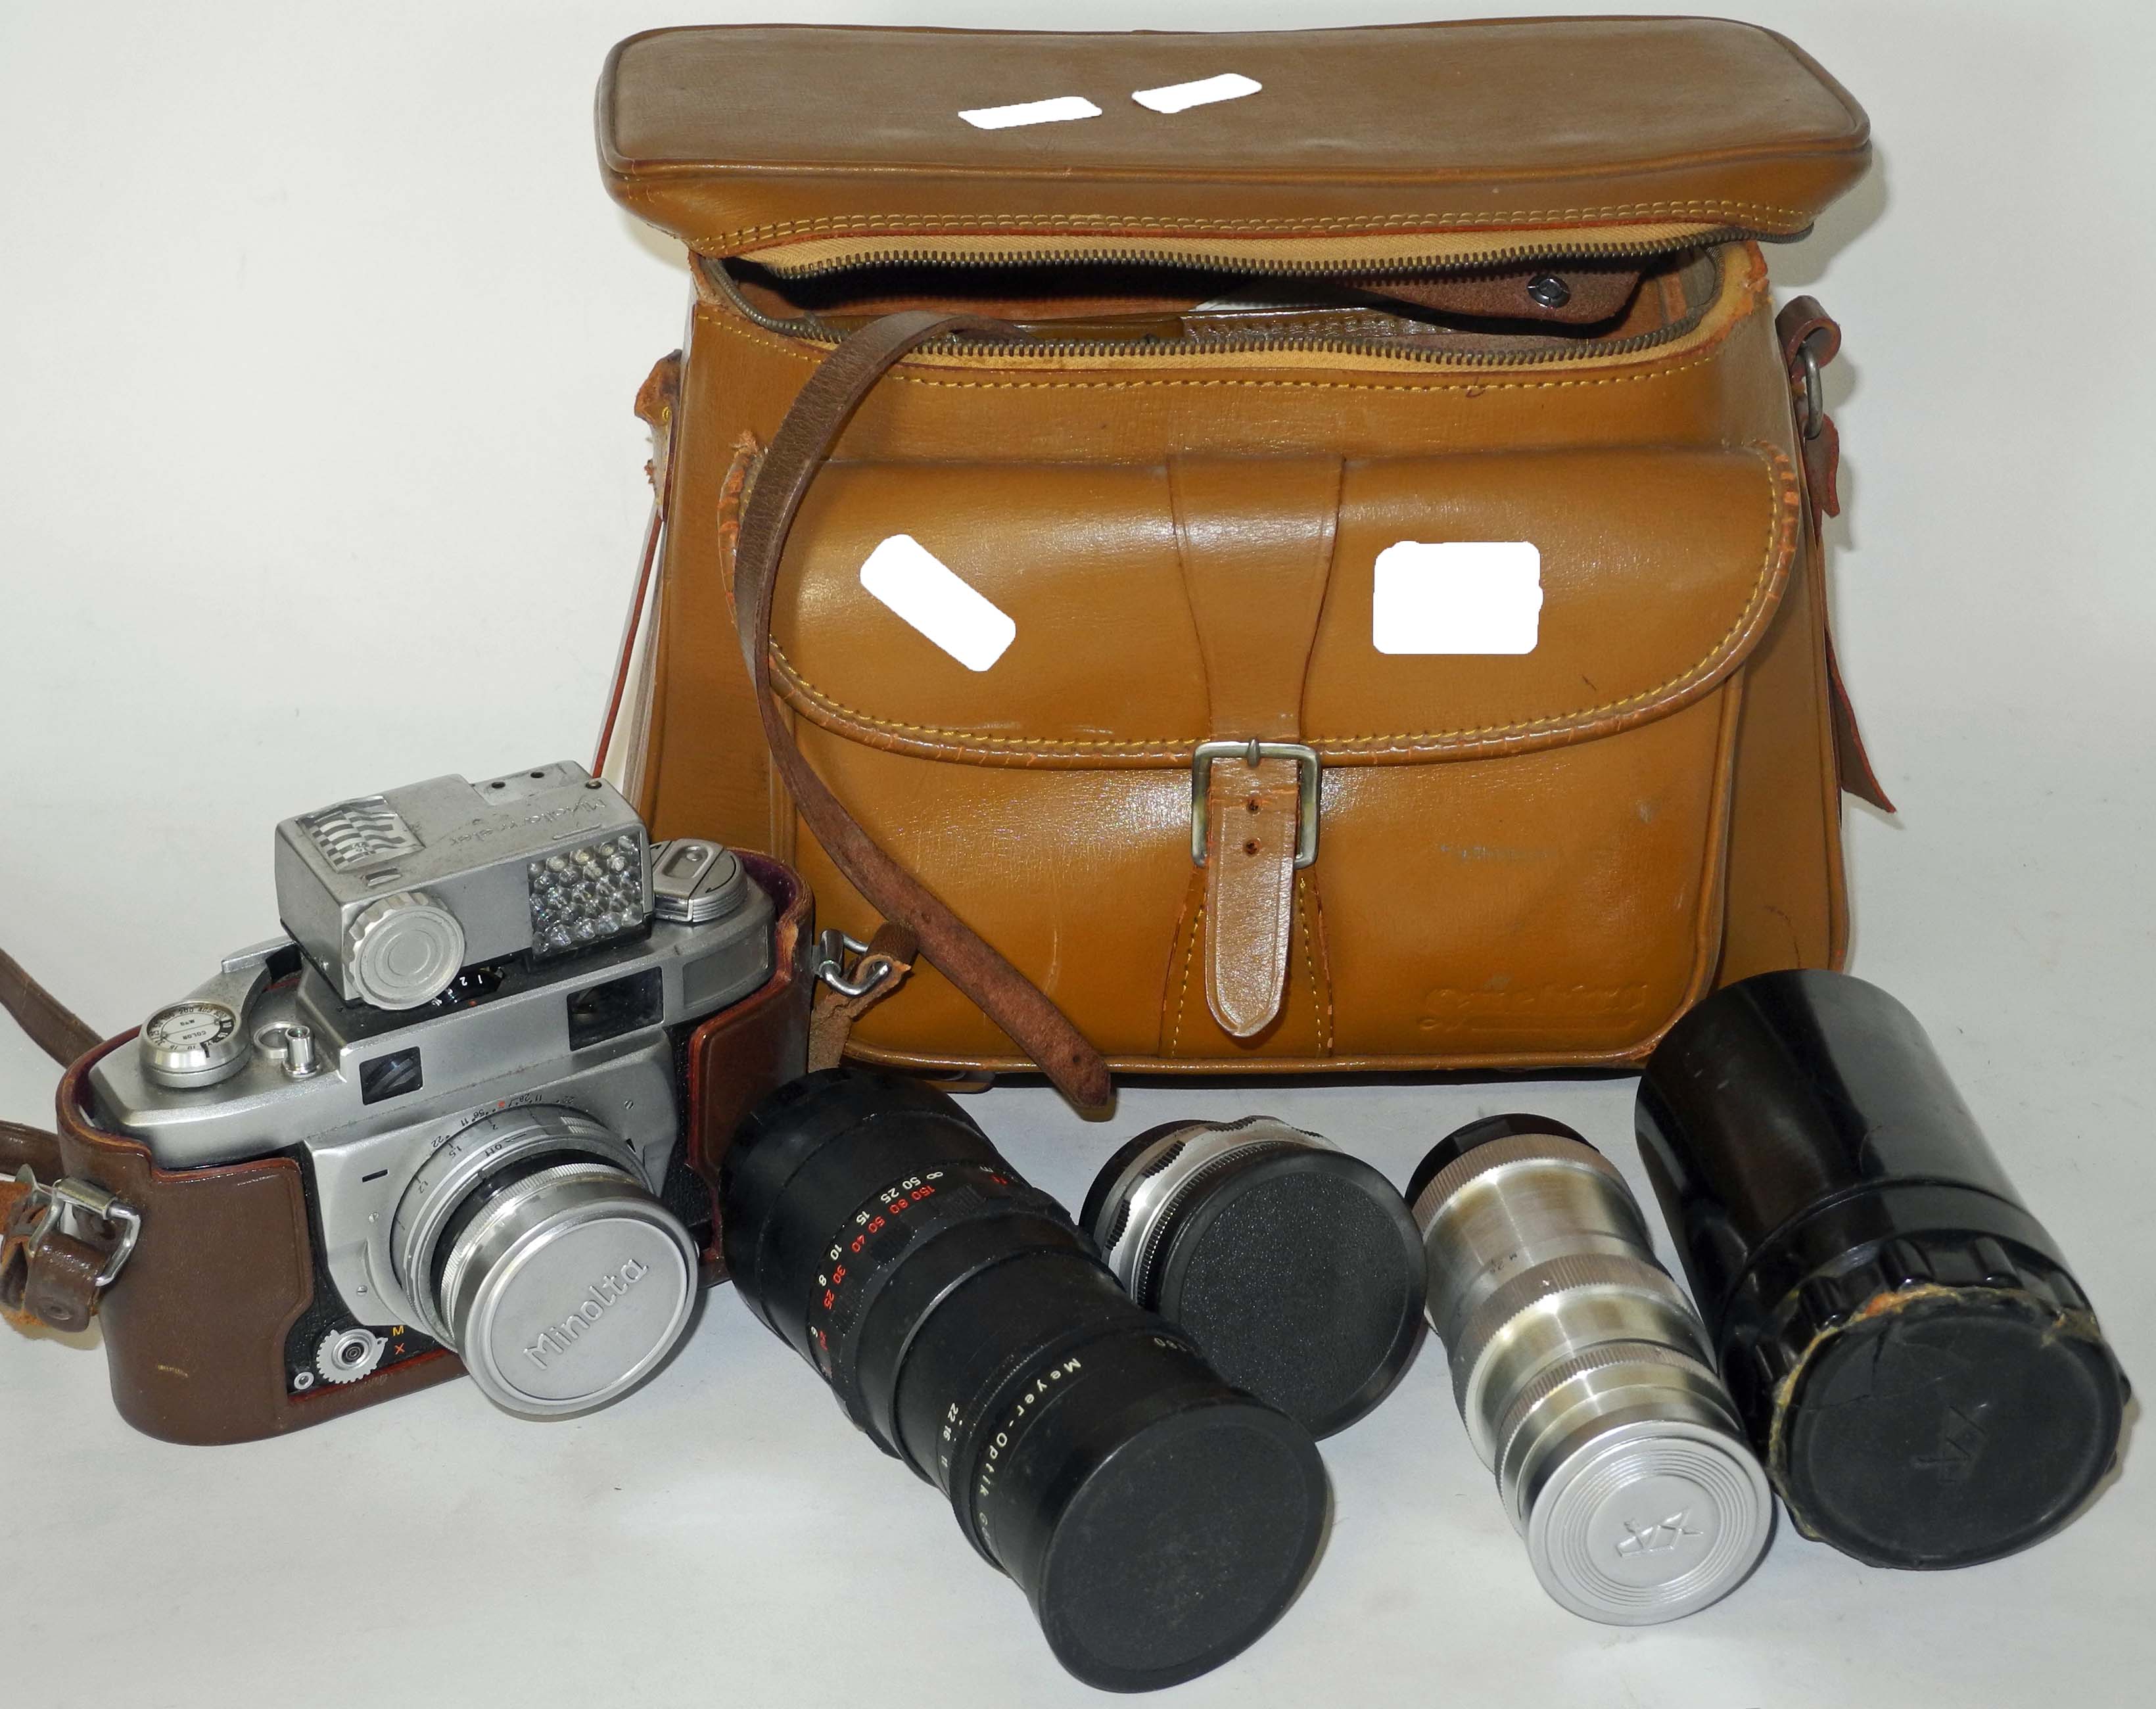 A post-War Leica camera, Serial No. 214029, Model 111A, sold with leather carrying case, also